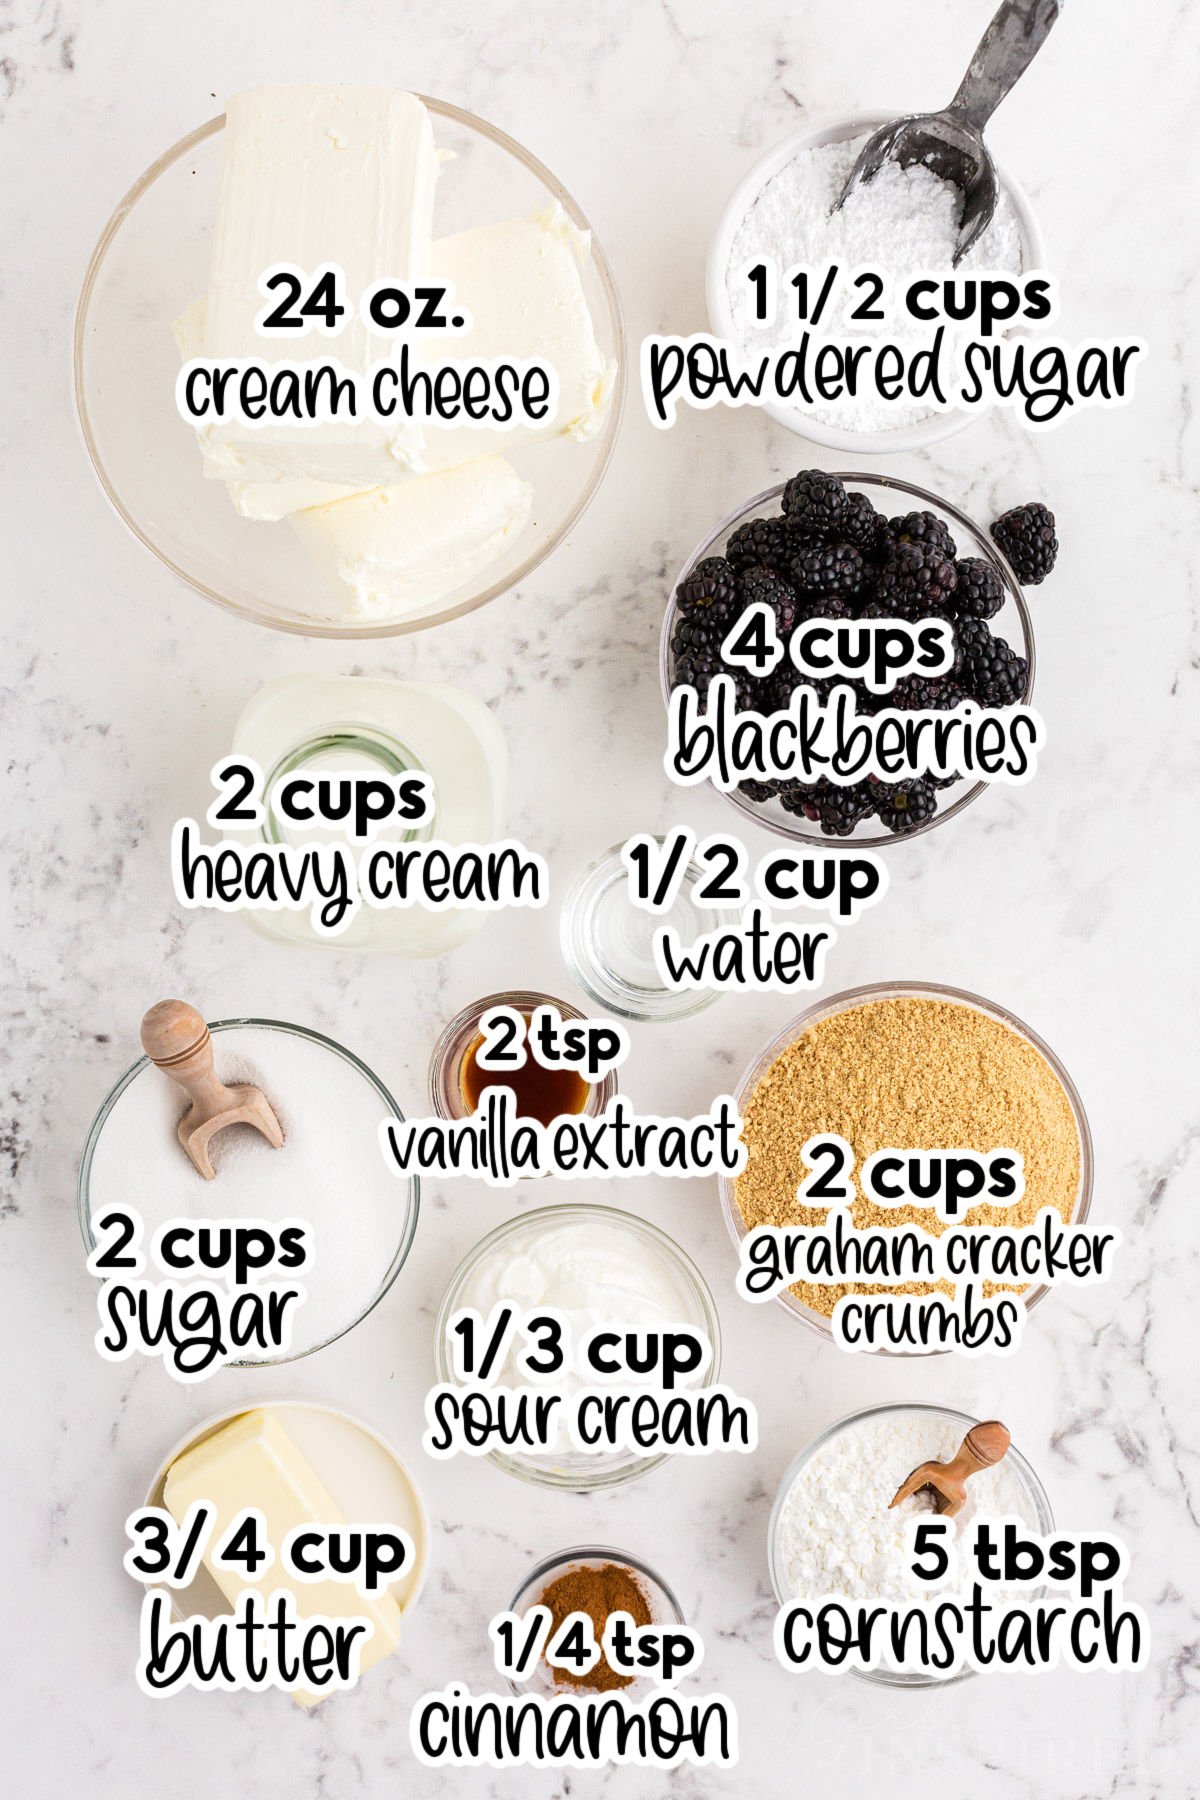 Individual ingredients for the no bake blackberry cheesecake set out in bowls and plates, with text labels.